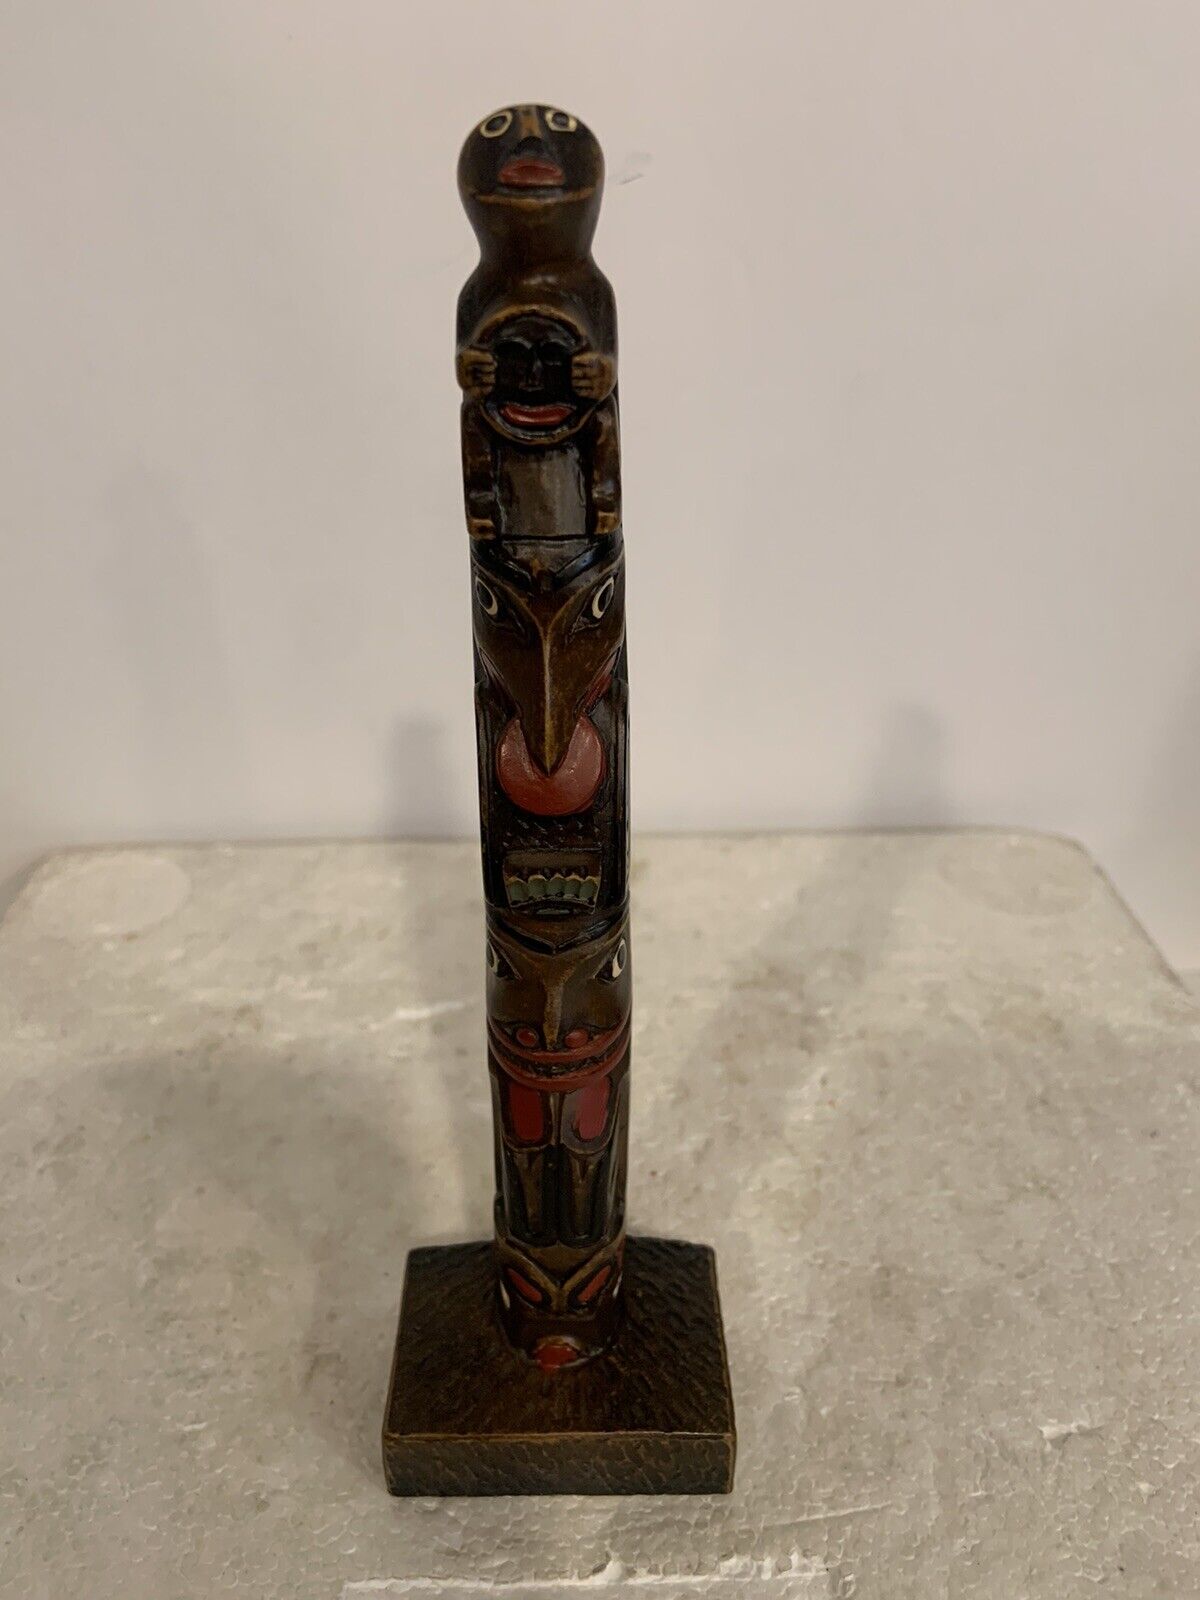 Vntg Totem Pole Figurine Hand Carved Hand Painted 7.5” Tall RARE See All Photos